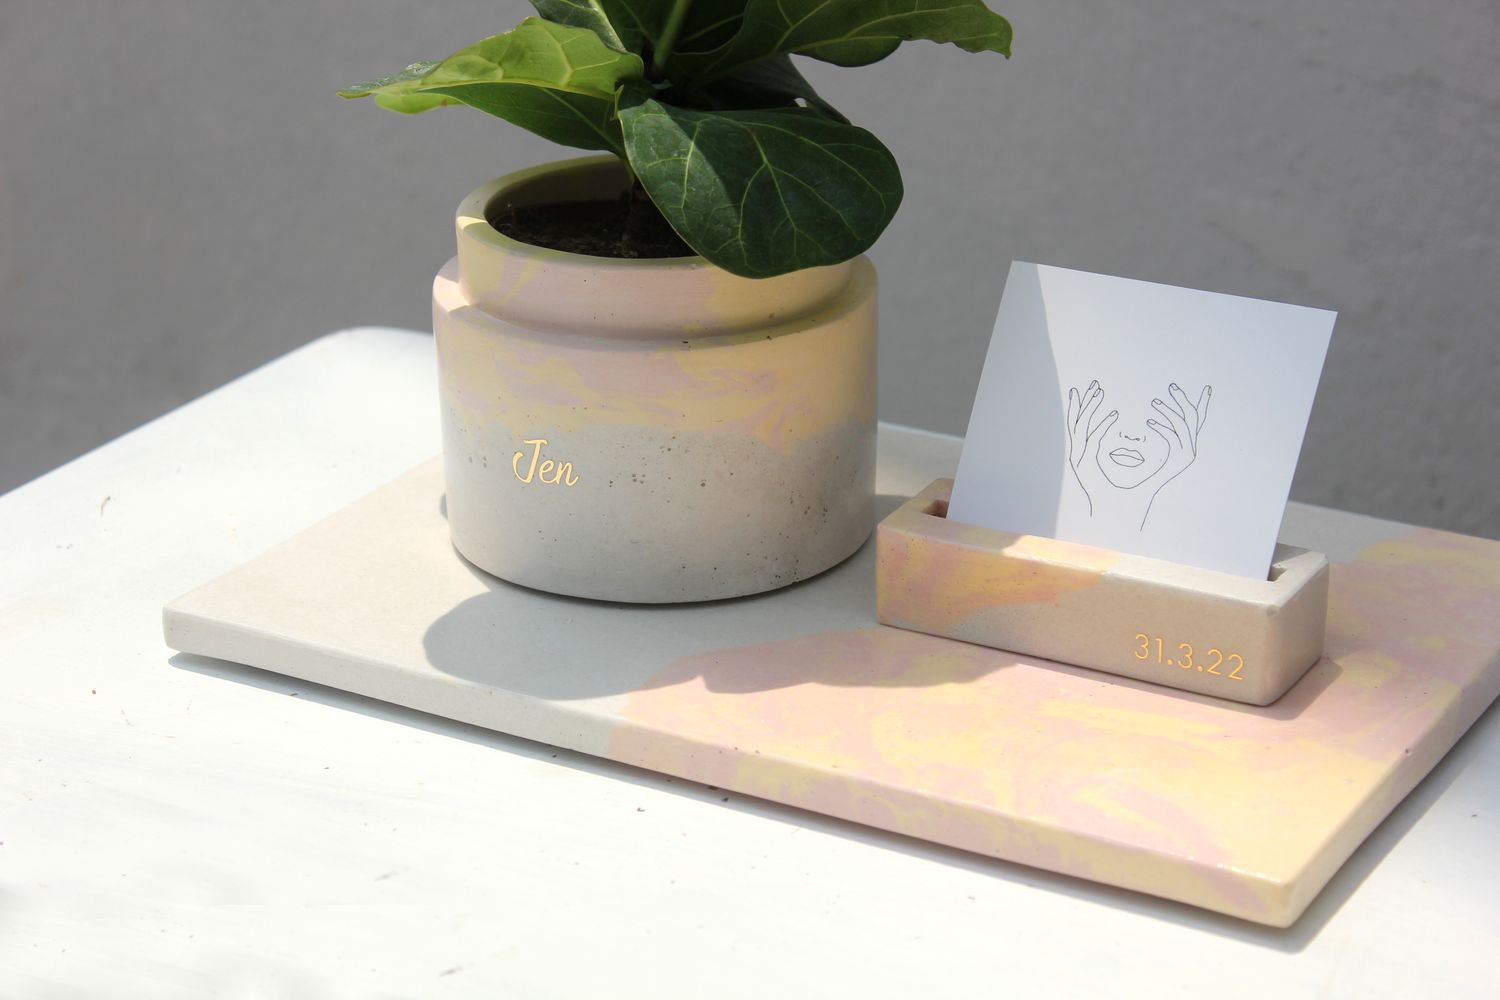 Concrete Dezign | PERSONALIZE GIFTING